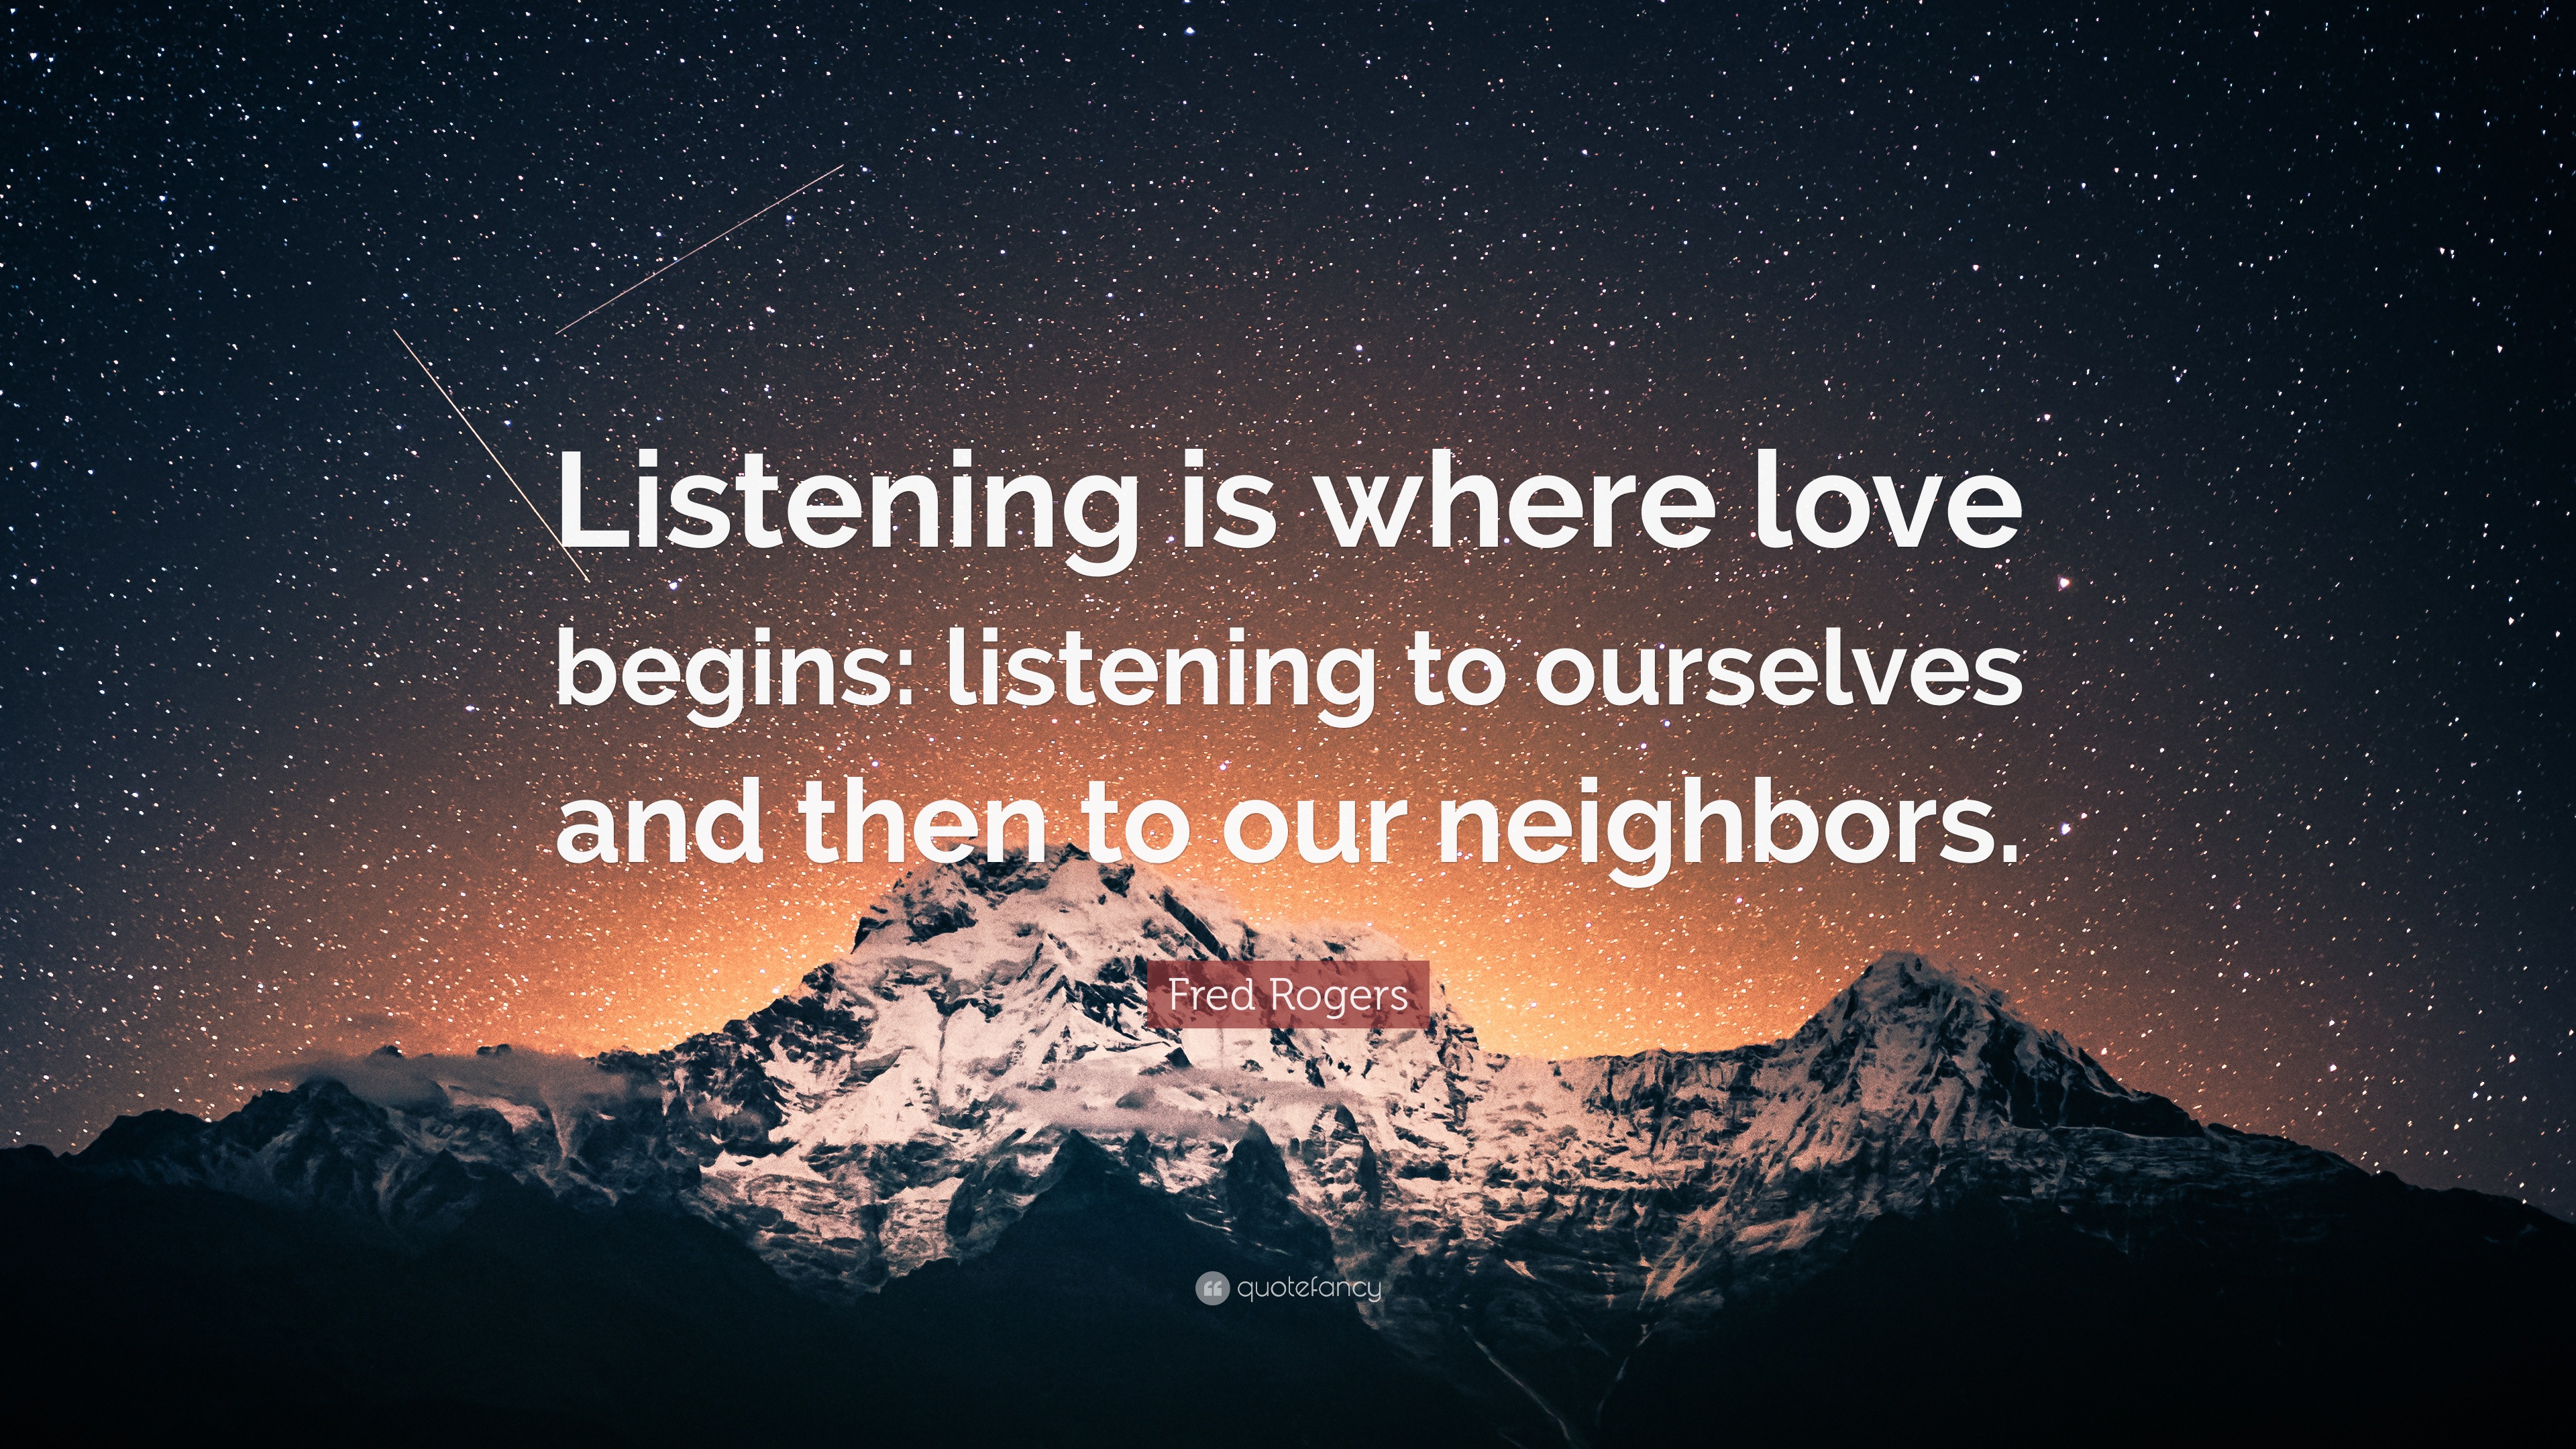 quotes about listening and sharing with an open heart